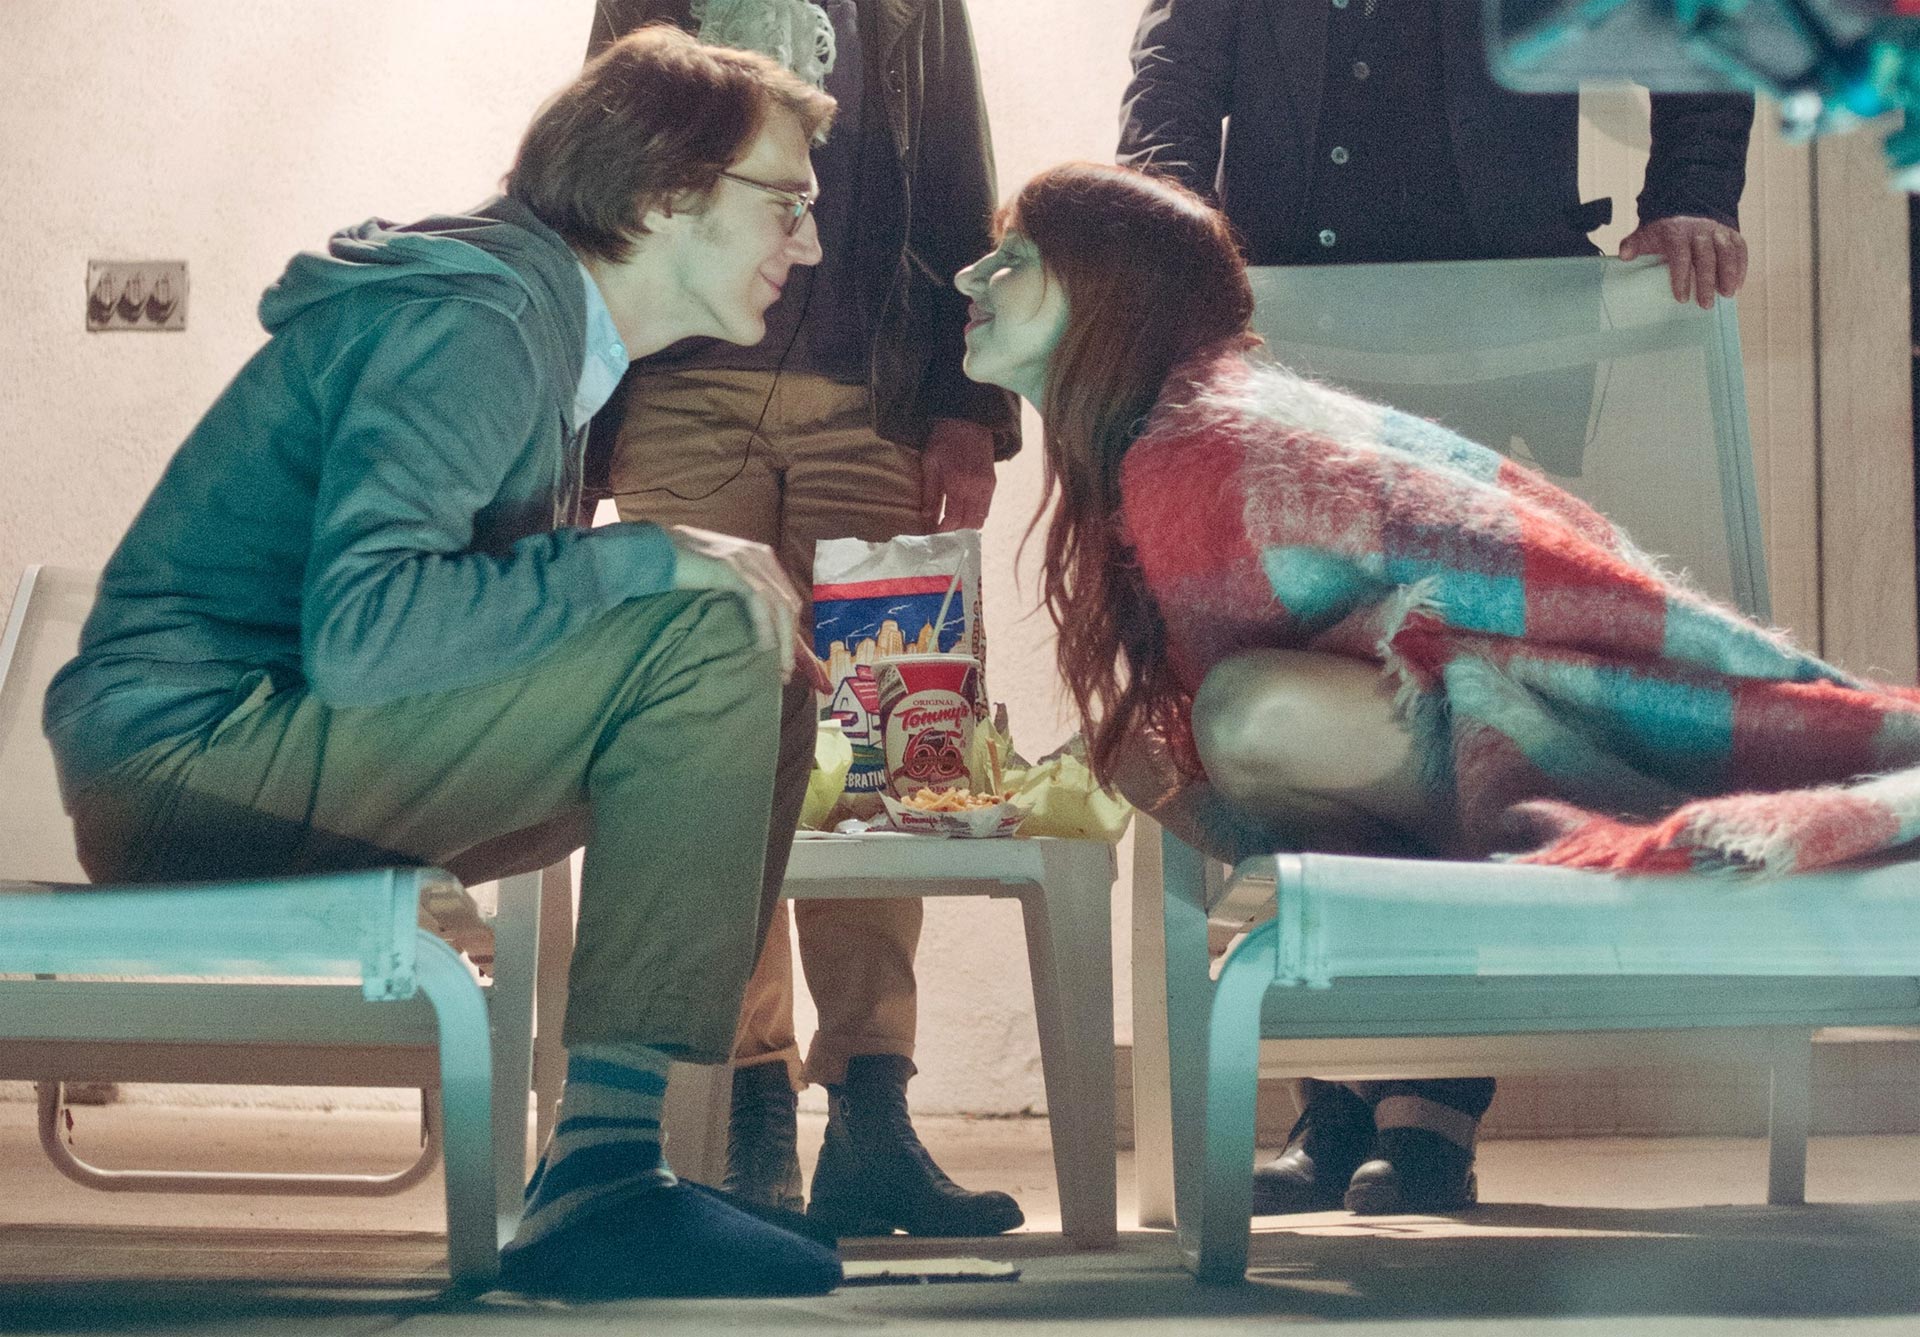 RUBY SPARKS is Available on Blu-ray/DVD on October 30th